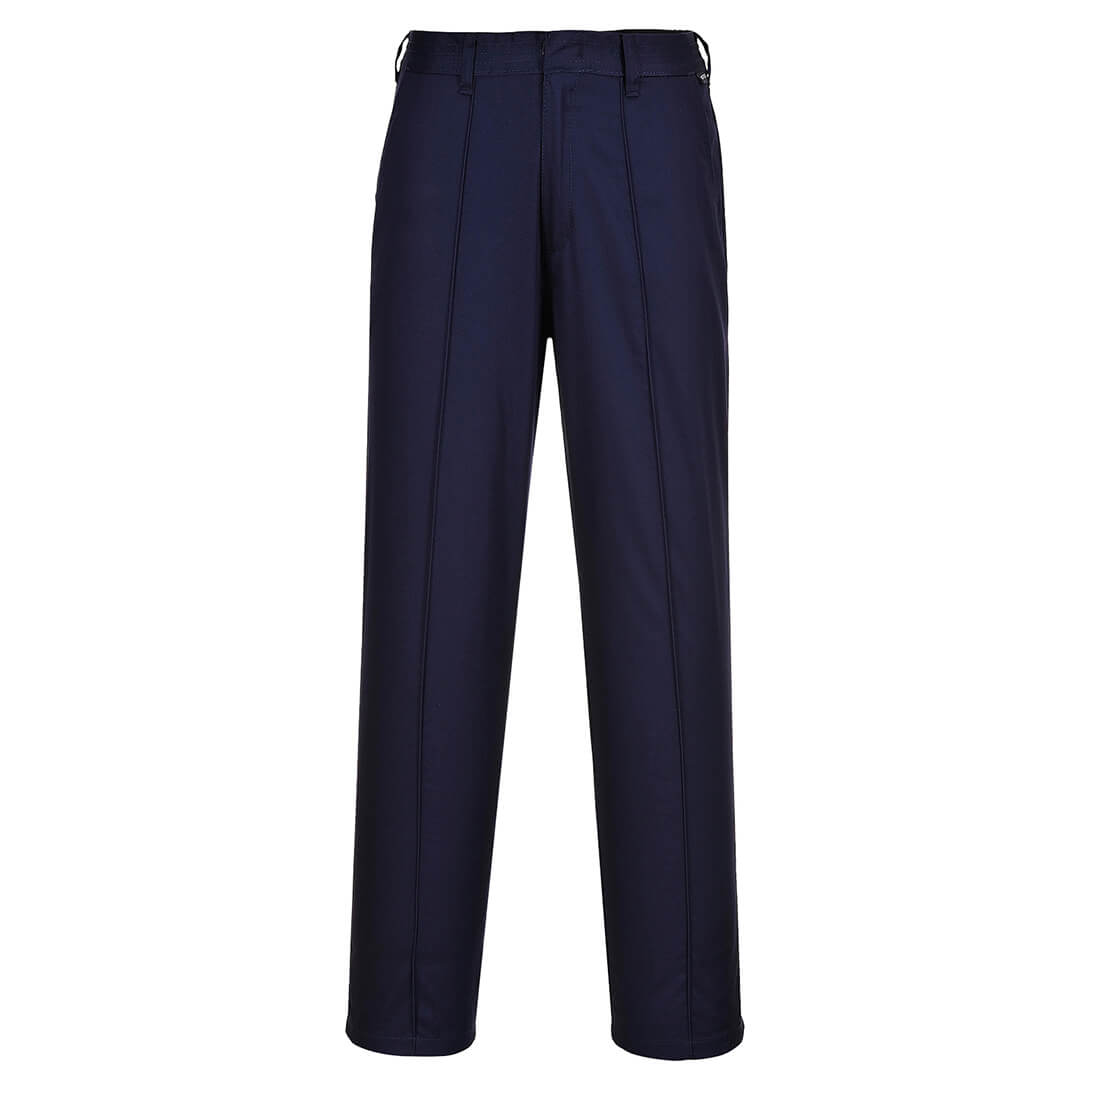 Image of Portwest LW97 ladies Elasticated Trousers Navy Blue XL 31"